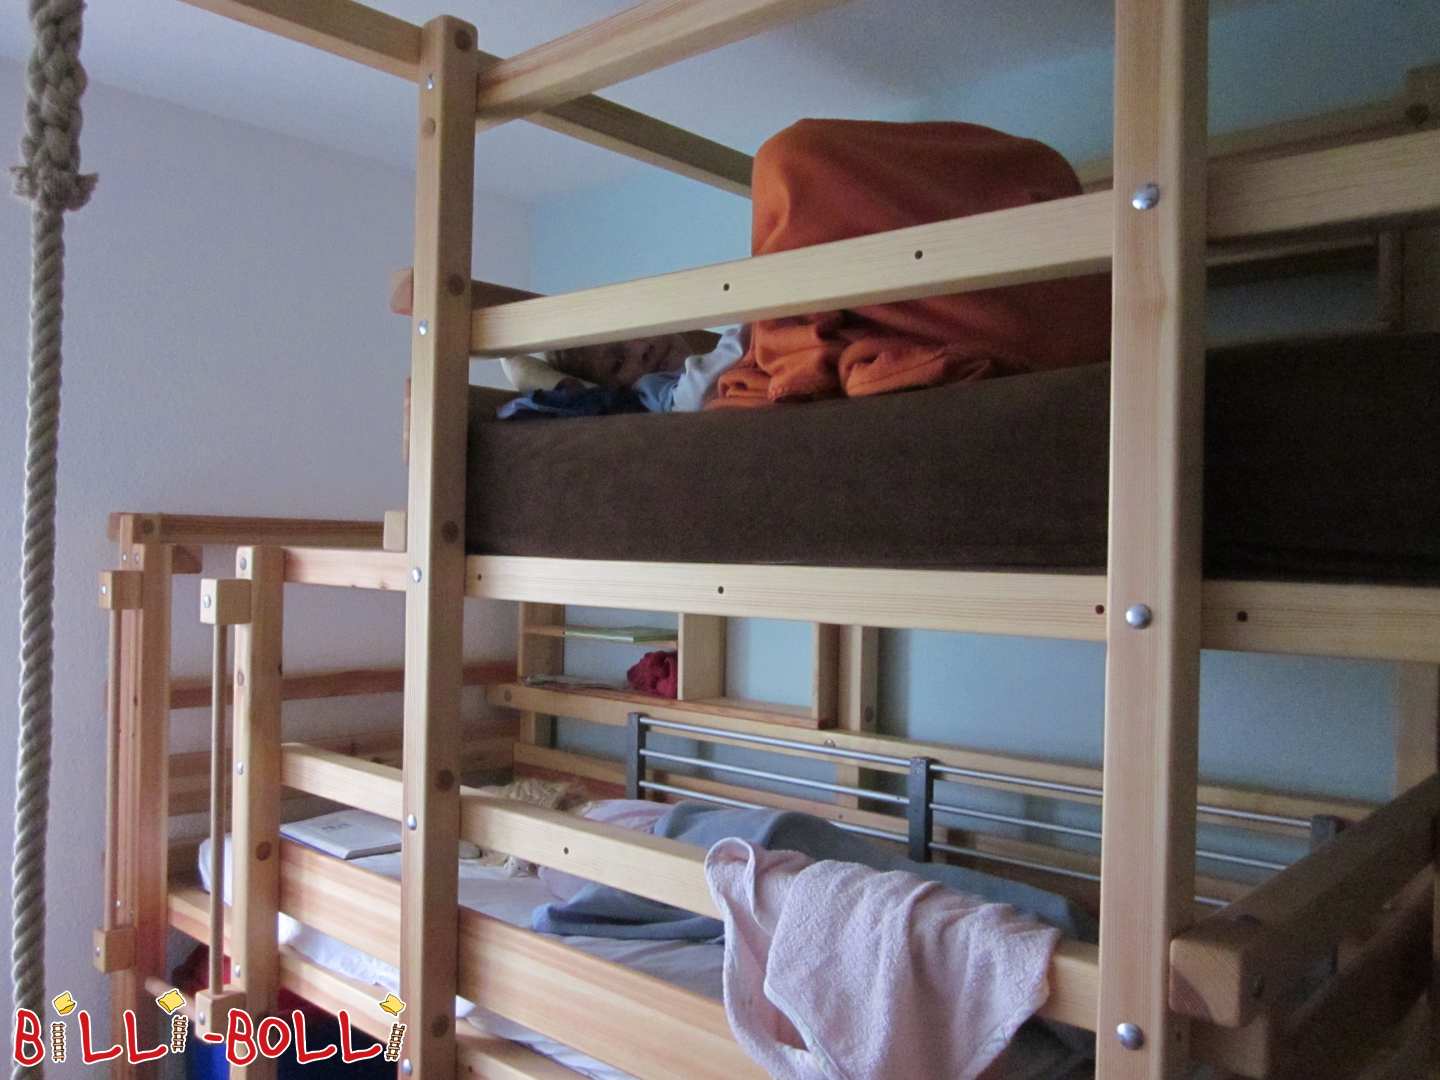 Both-Top Bed Type 2B Oiled in Pine (Category: second hand loft bed)